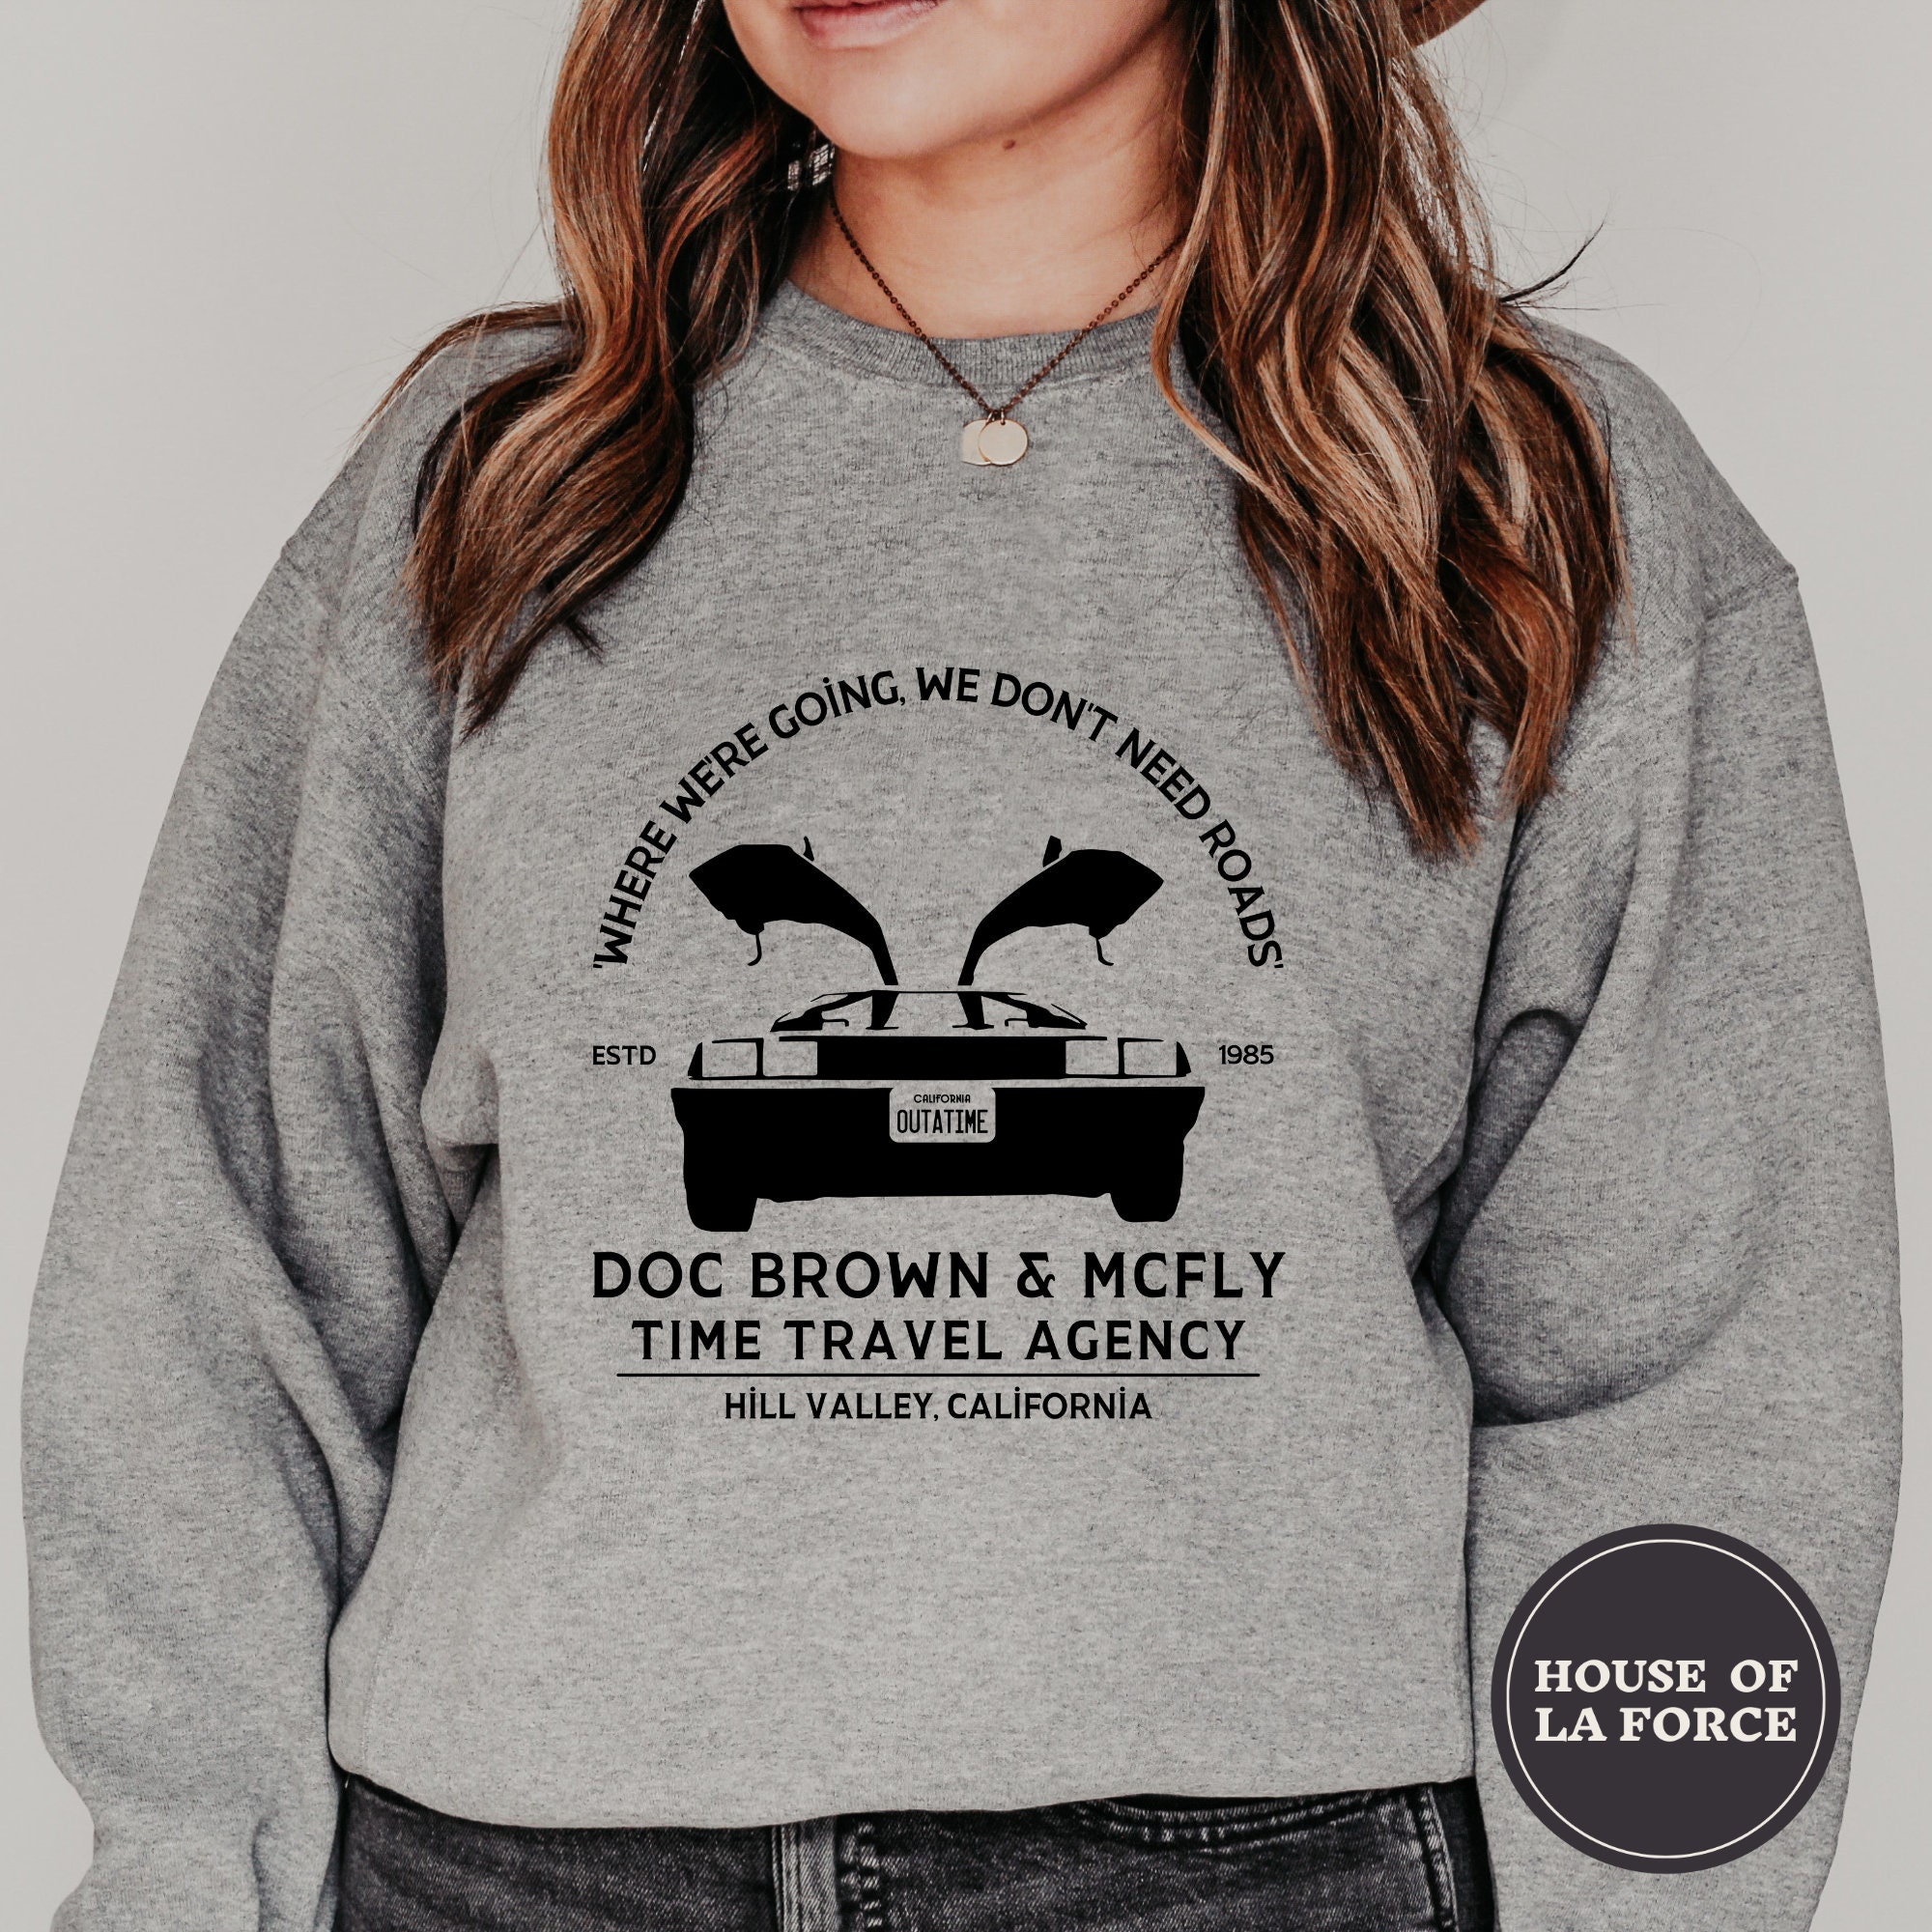 Doc Brown & Mcfly Time Travel Agency Sweatshirt, Back to the